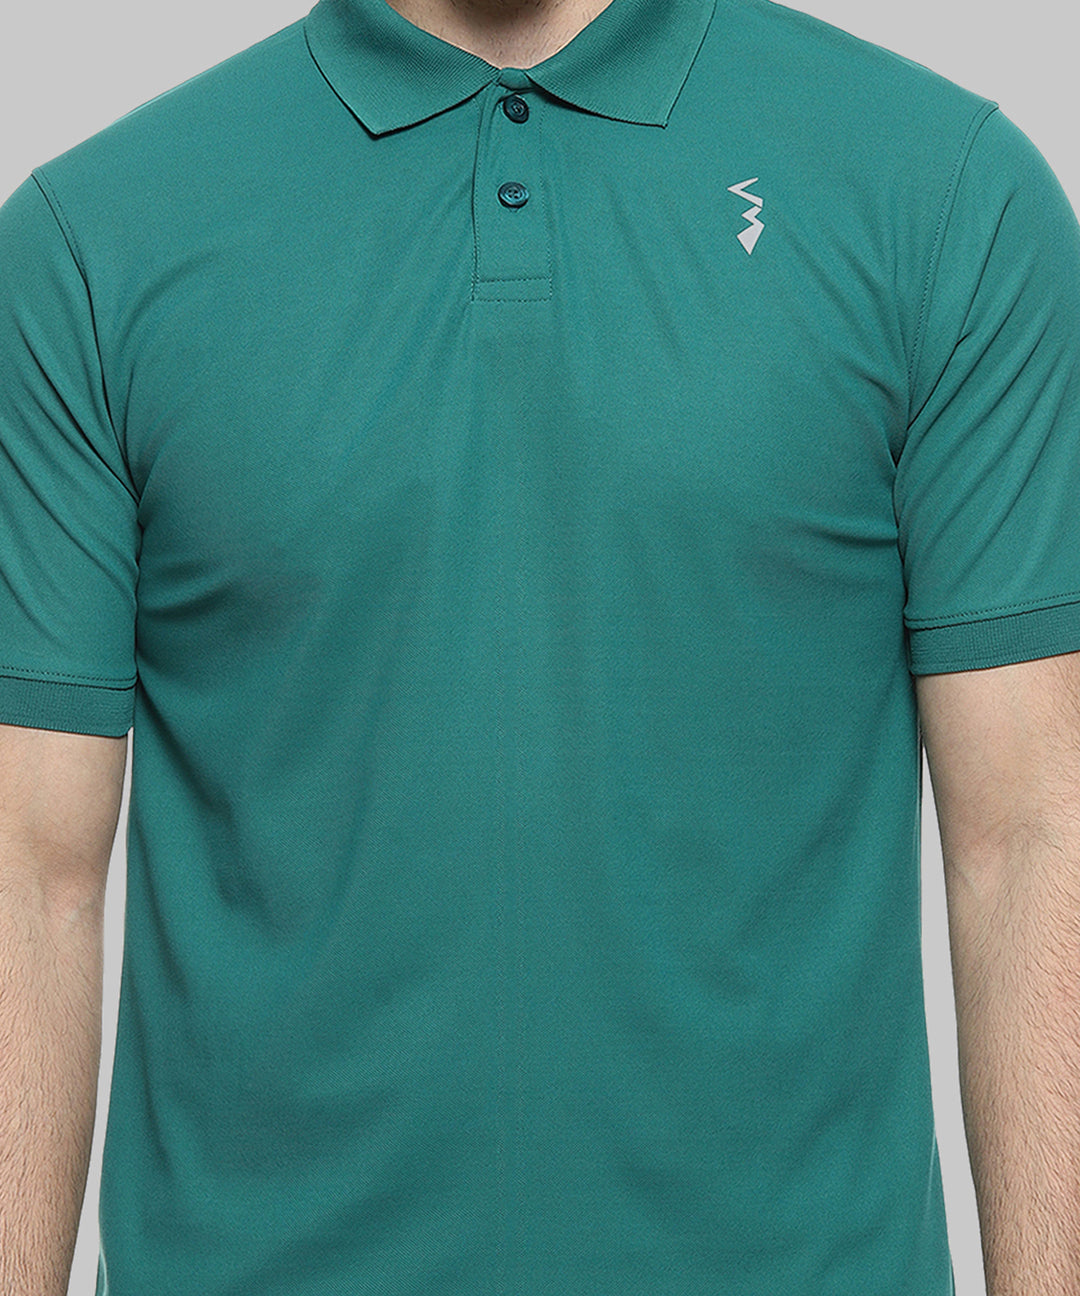 Green Men Solid Polyester Sports Tshirt Polo Neck